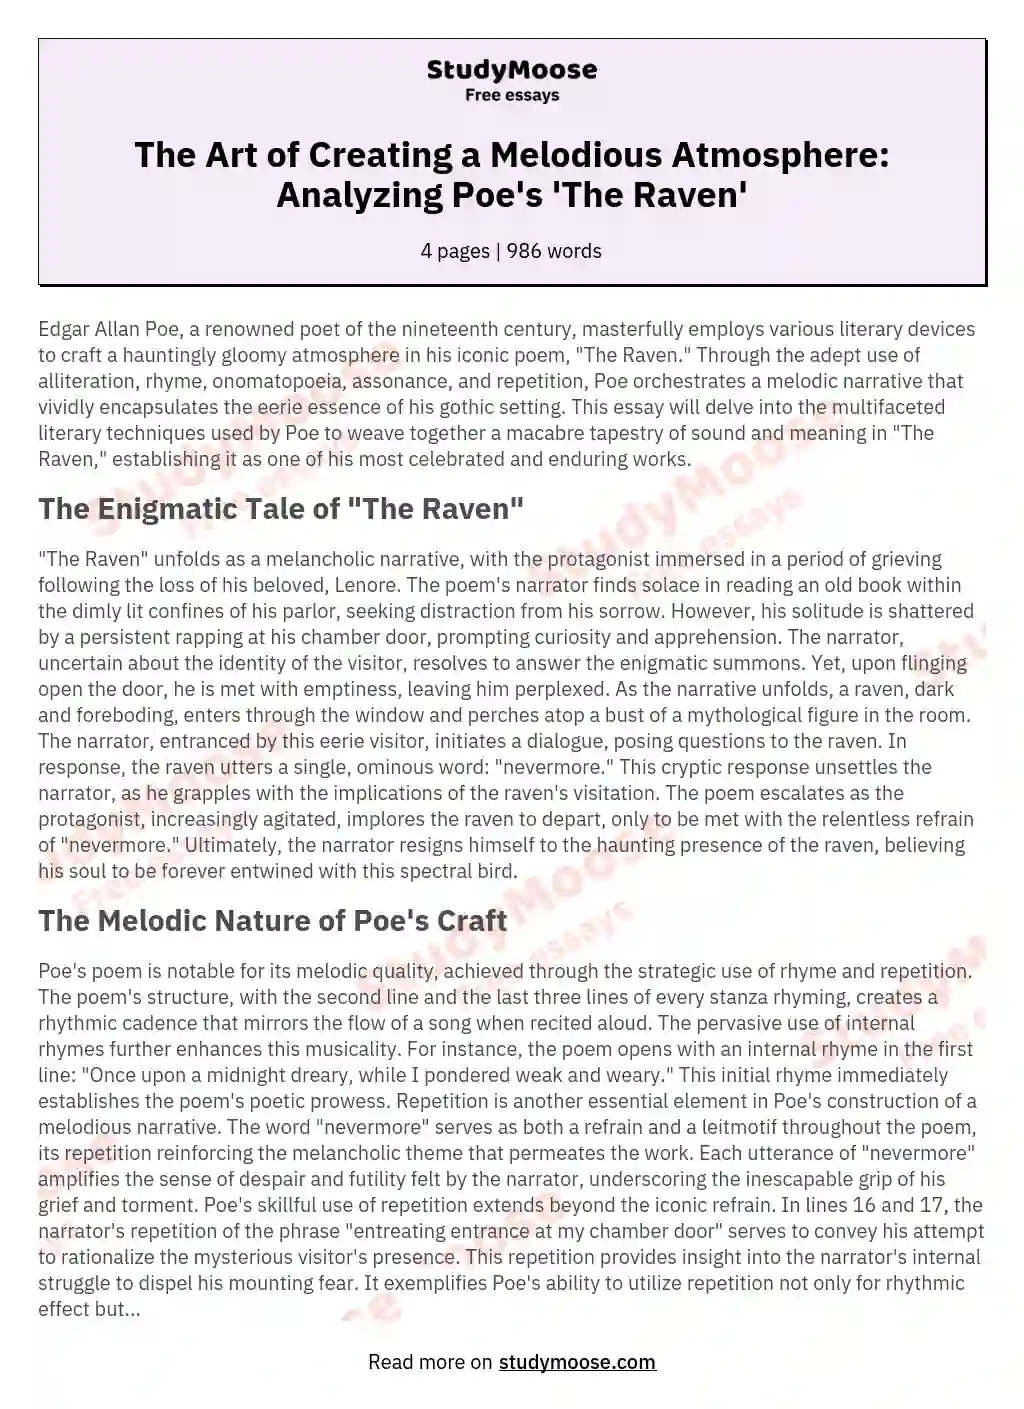 The Art of Creating a Melodious Atmosphere: Analyzing Poe's 'The Raven'